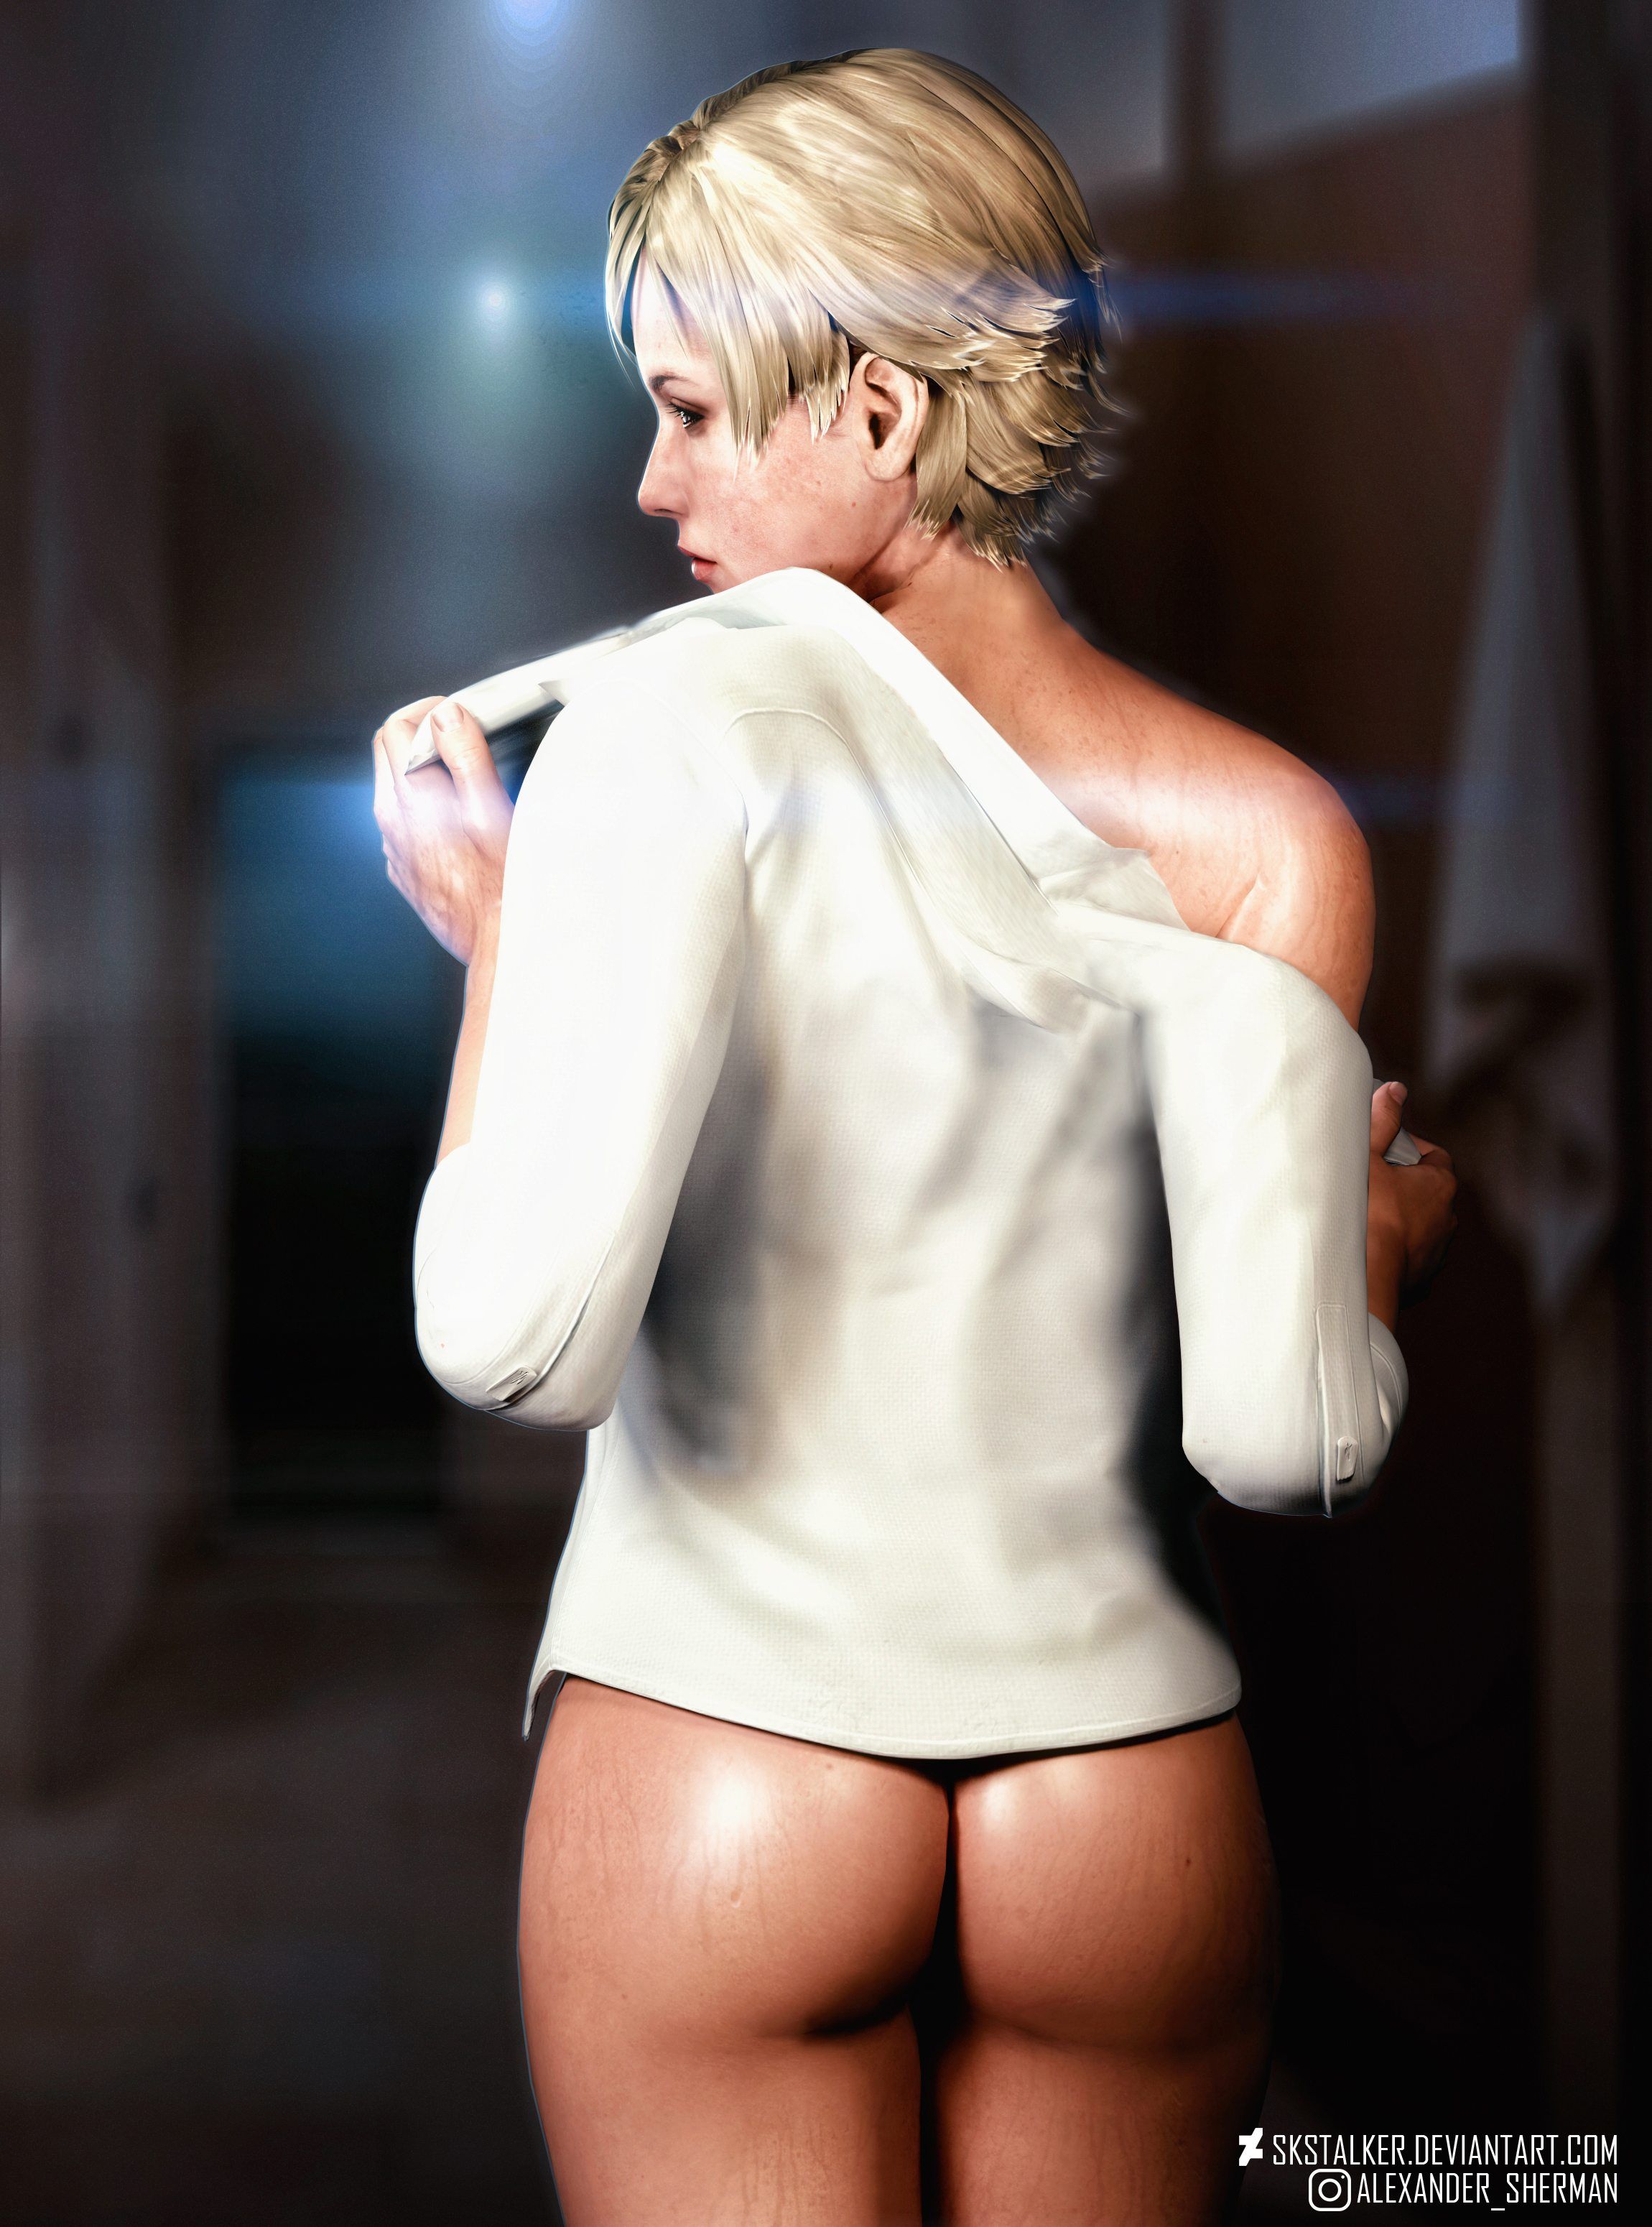 Captain R. recommendet sherry birkin collection